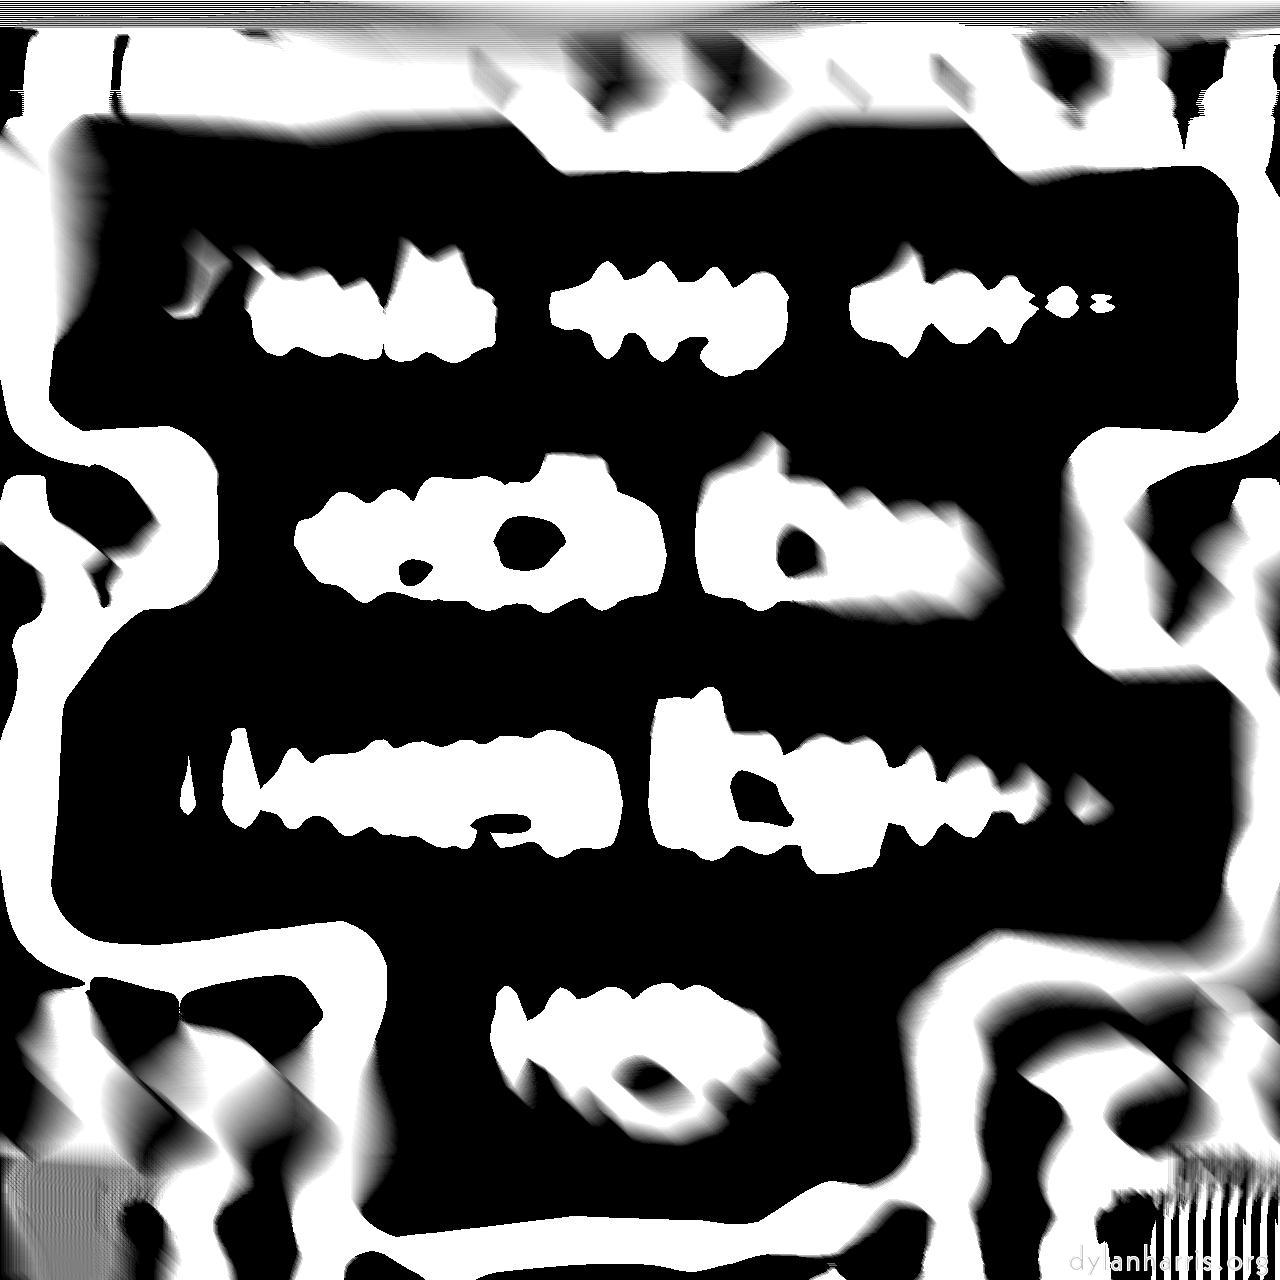 image: msg 7 :: bw abstract 1